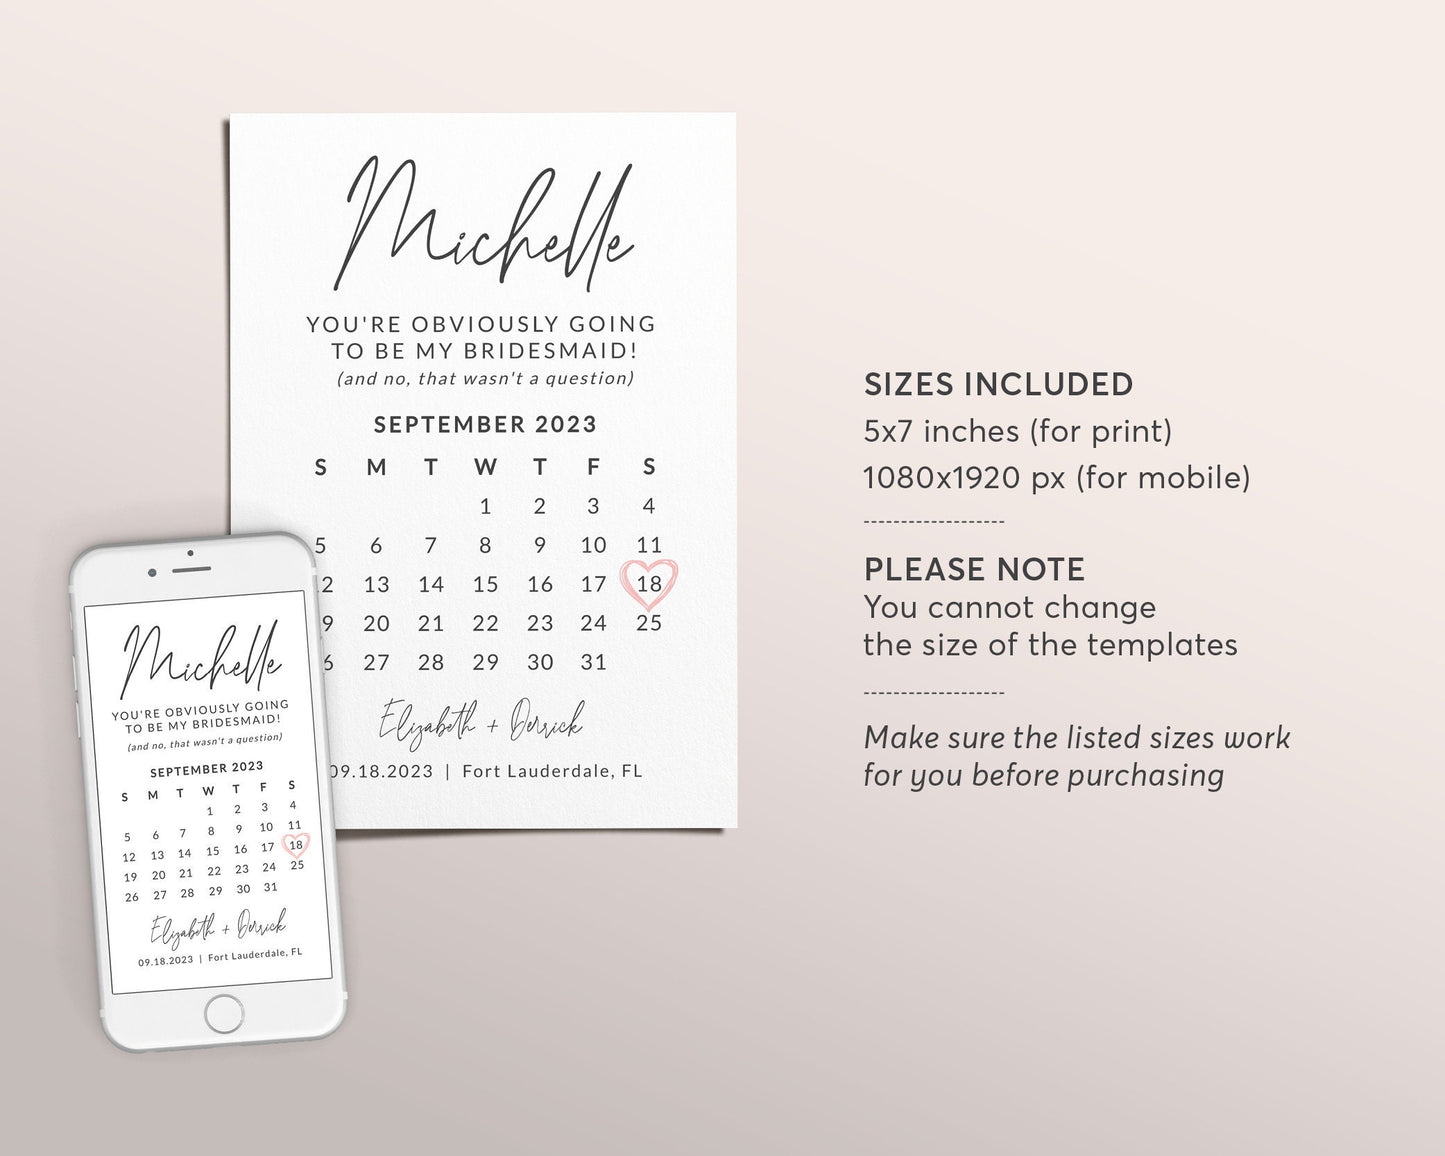 Bridesmaid Calendar Proposal Card Editable Template, Funny Maid Of Honor Proposal, Will You Be My Bridesmaid, Minimalist Save The Date